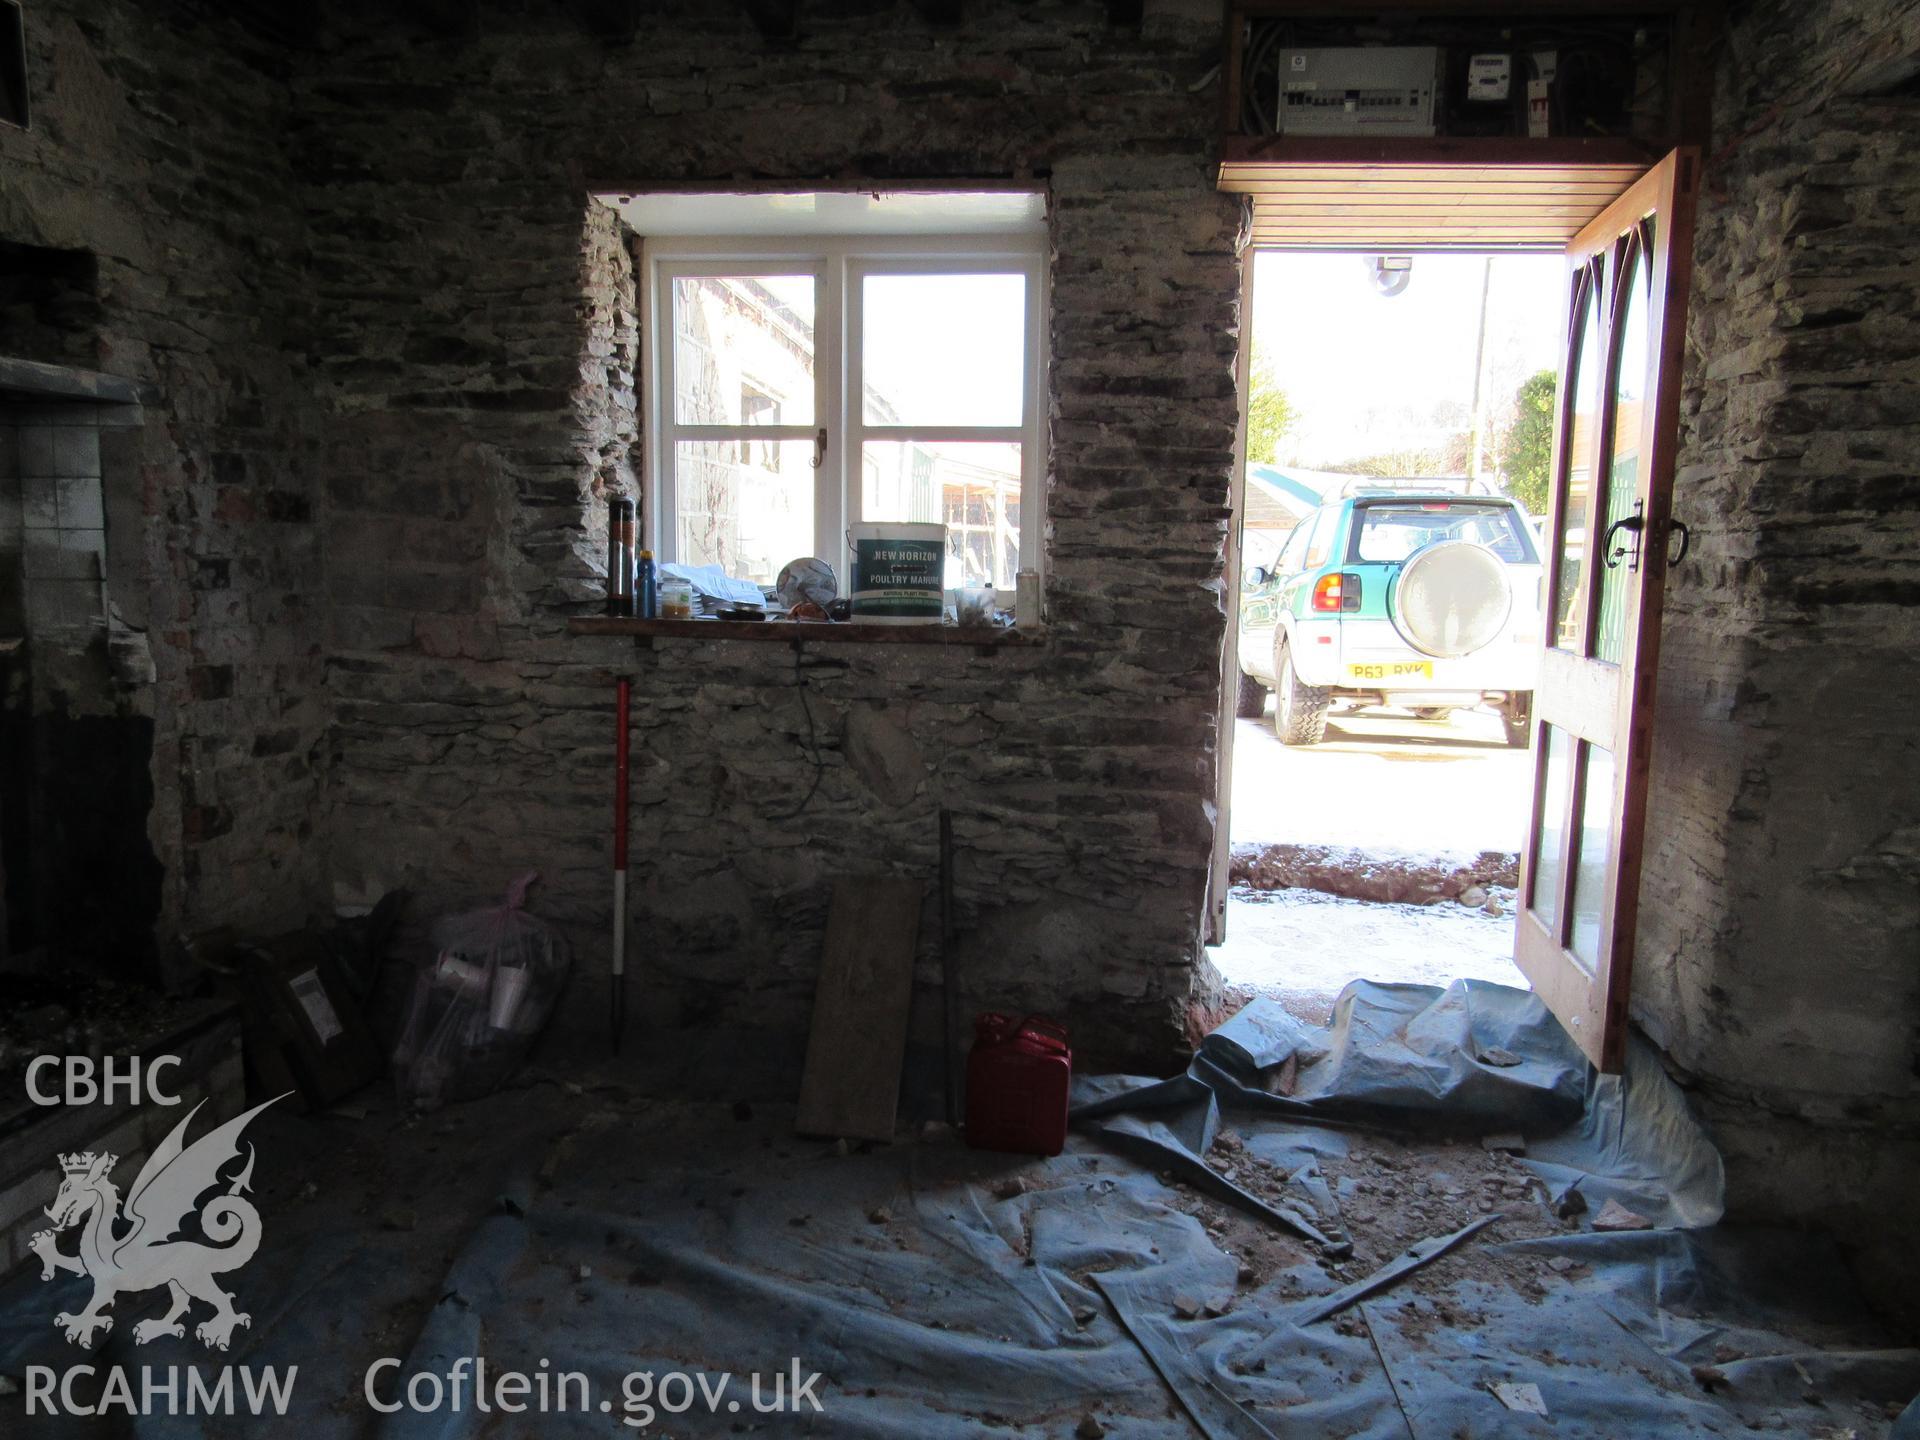 Kitchen in original house with modern inserted entrance doorway, view north-east. Photographed as part of archaeological building recording conducted at Bryn Ysguboriau, Llanelidan, Denbighshire, carried out by Archaeology Wales, 2018. Project no. P2587.